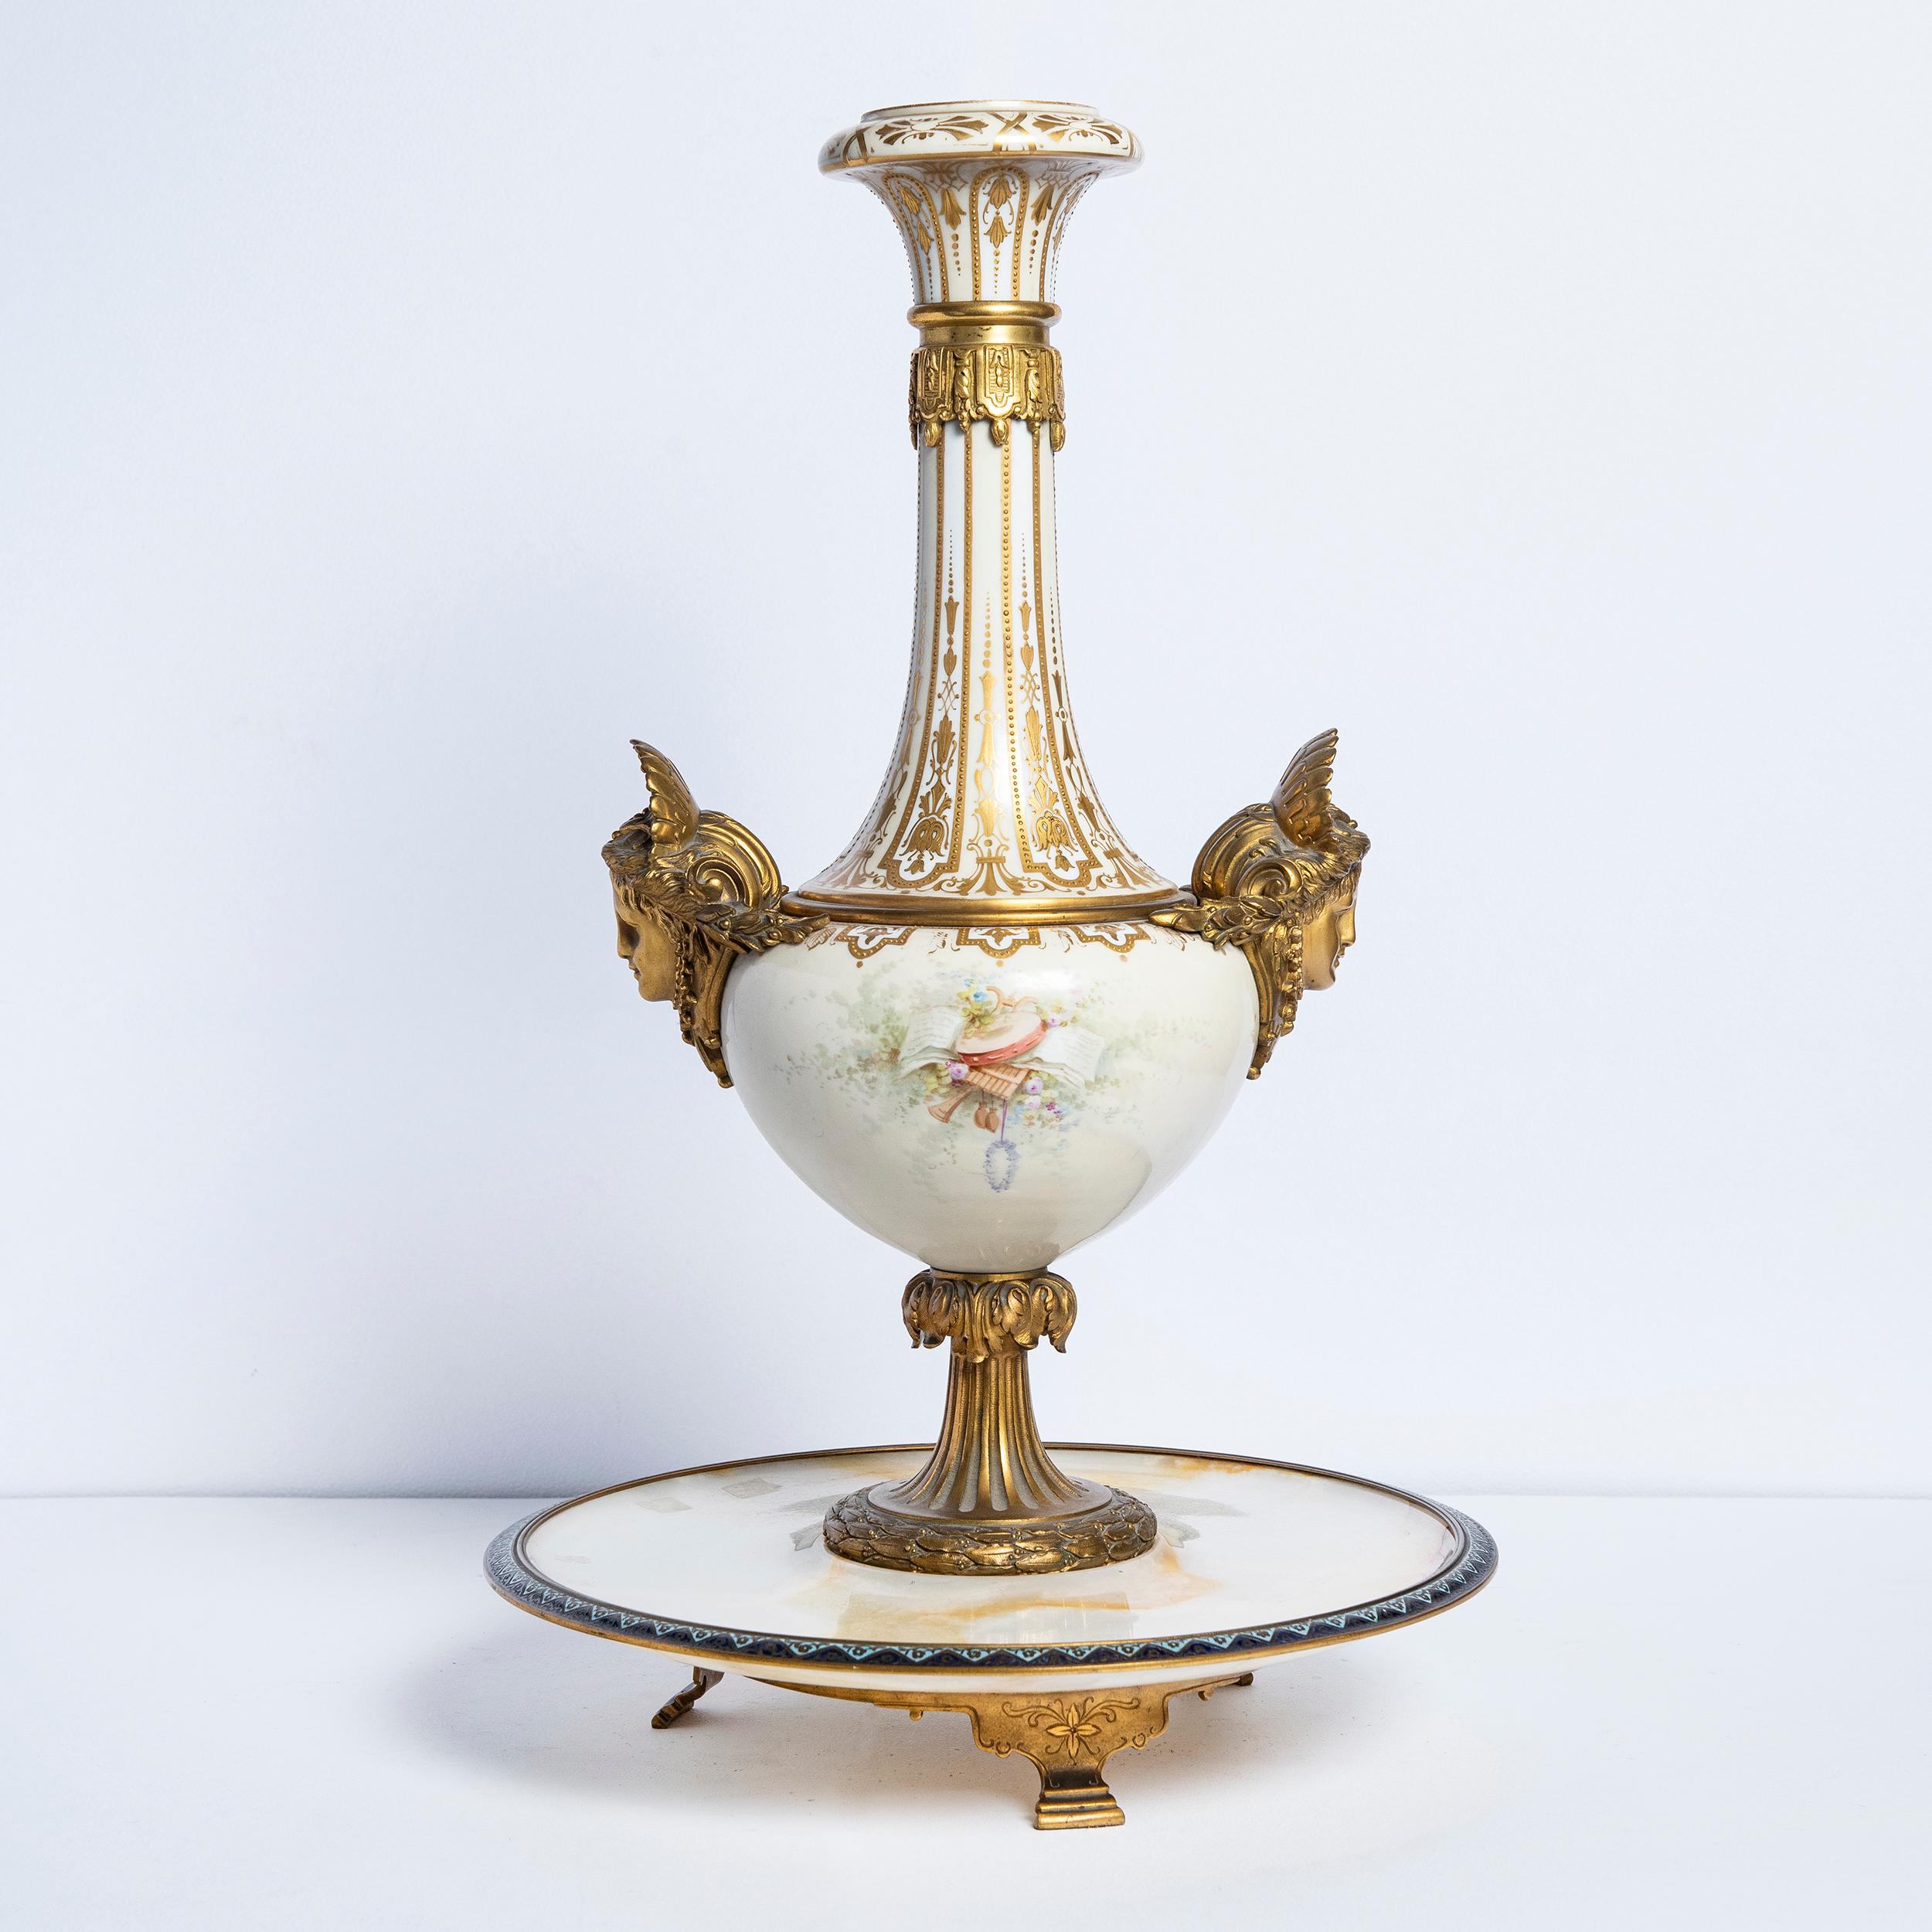 Onyx, porcelain, gilt bronze and cloisonnè Sevres center. Neoclassical Style. France late 19th century.